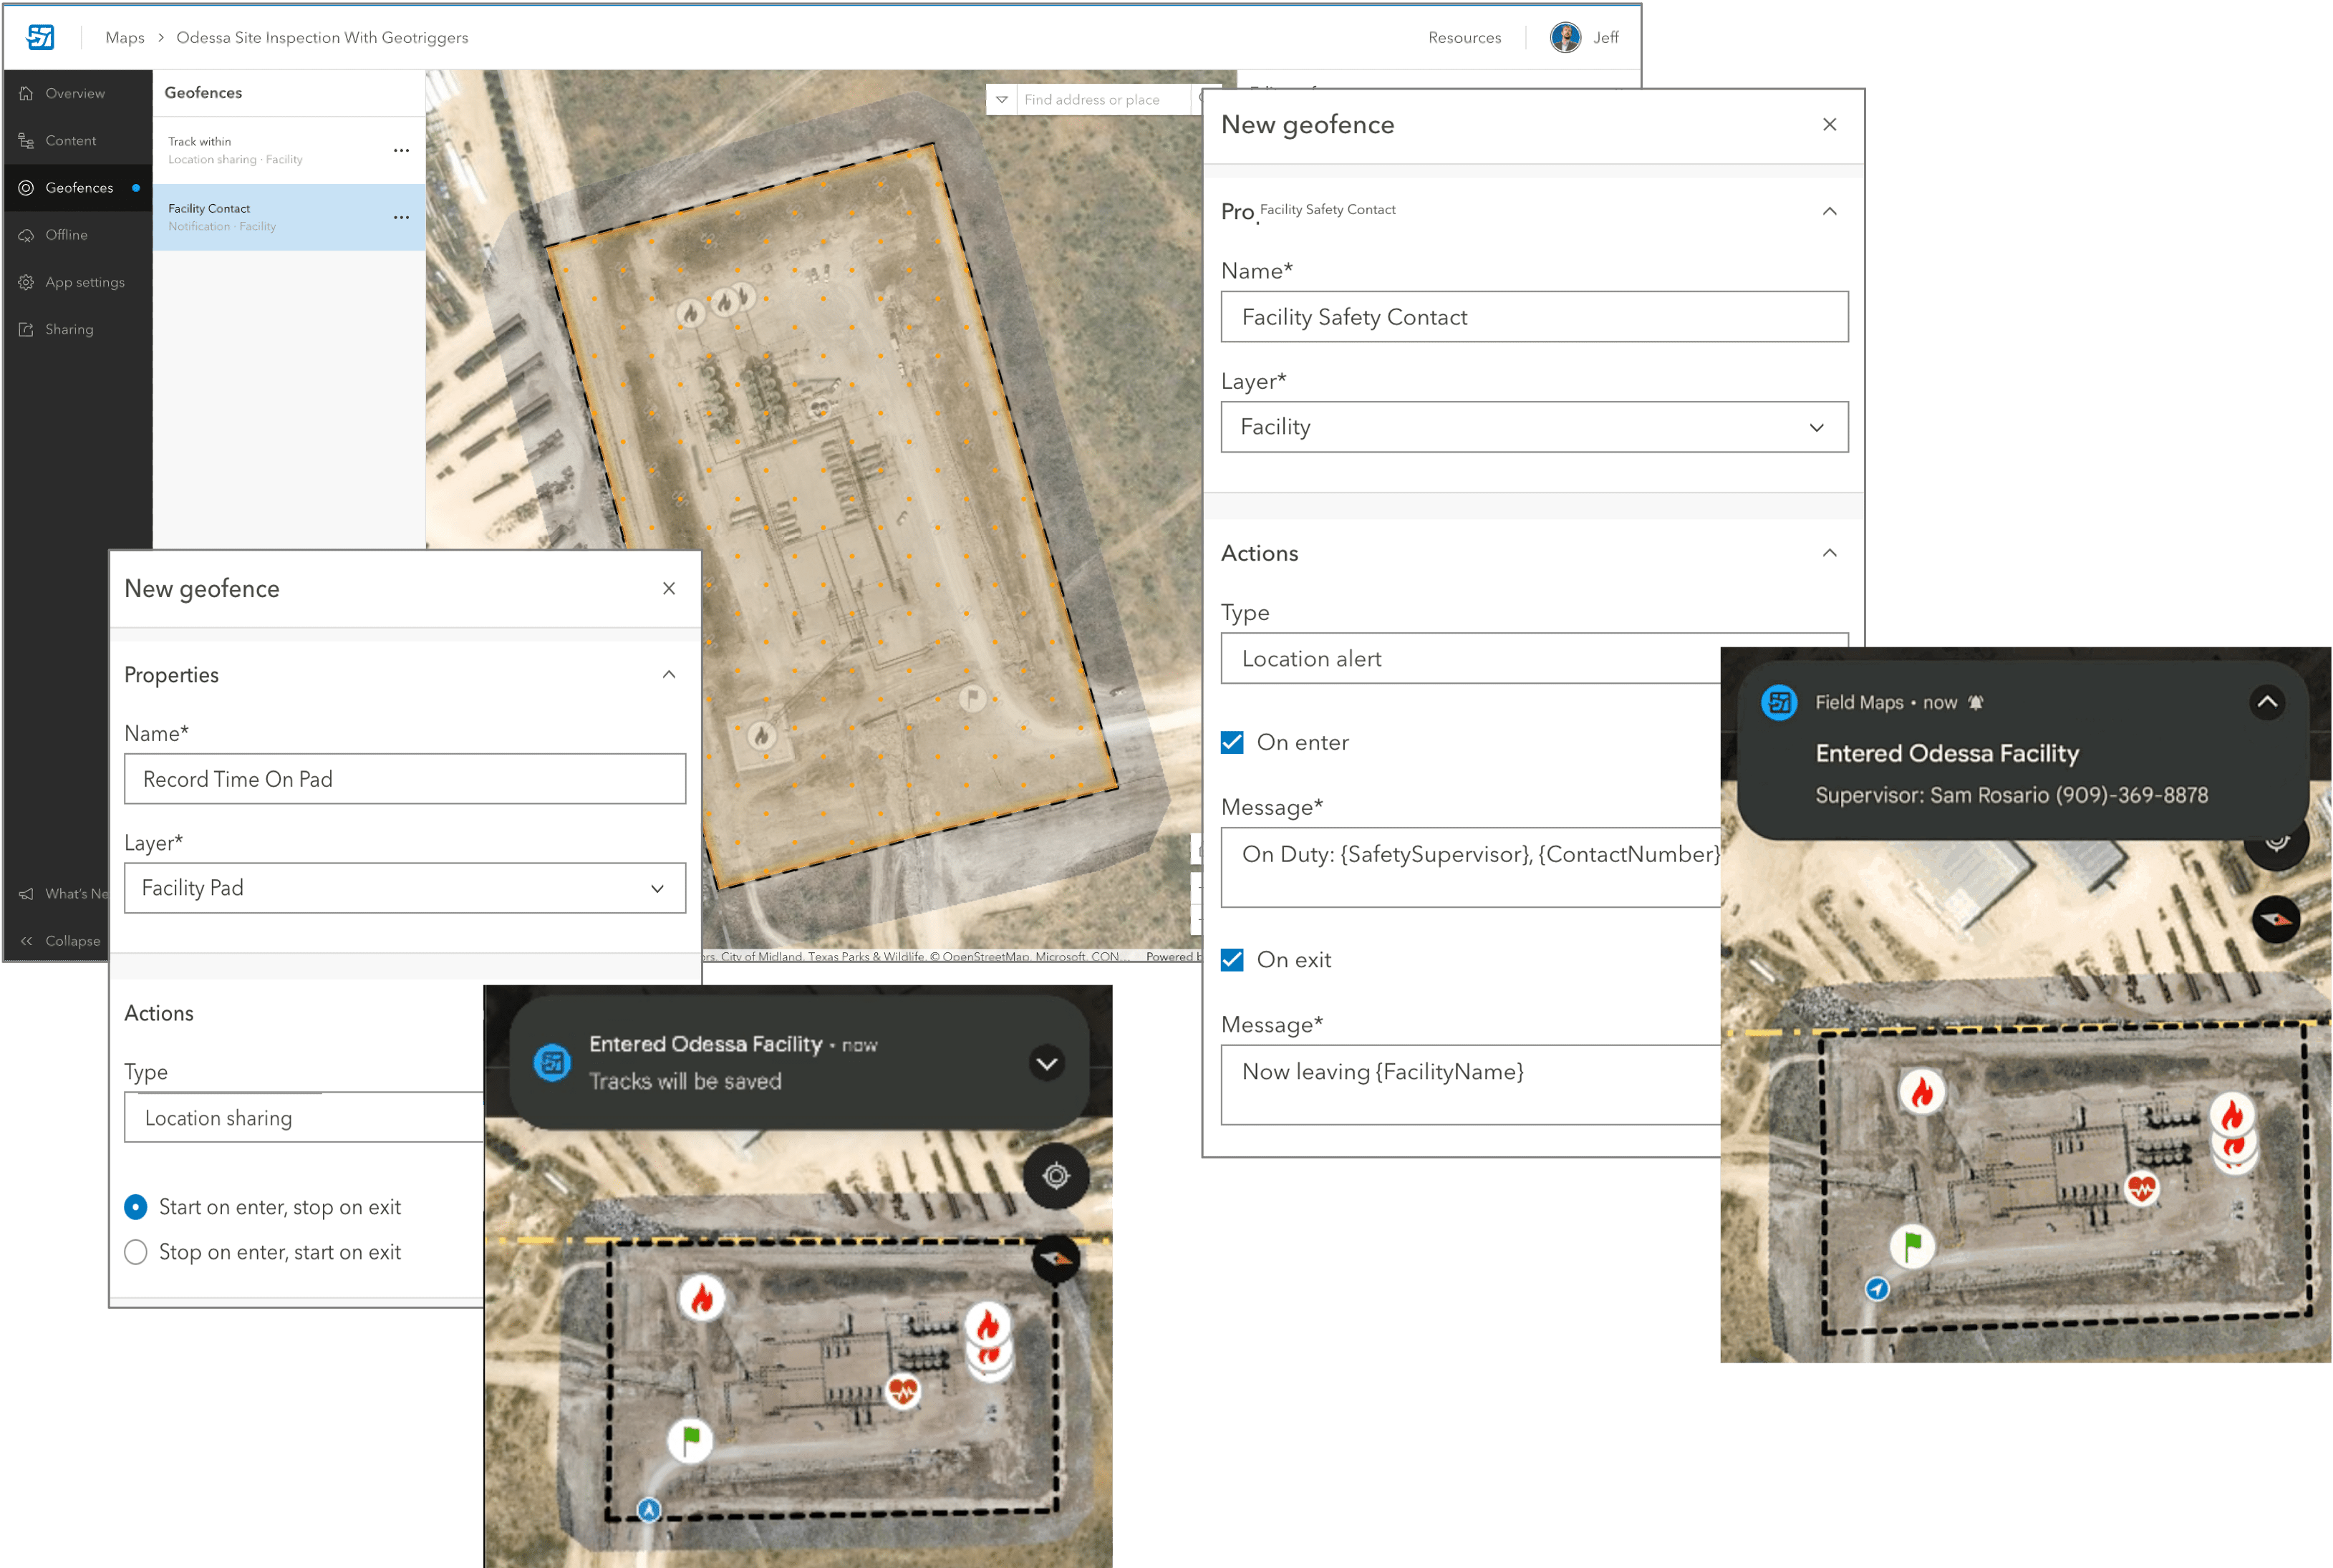 Control location sharing and receive location alerts by adding geofences to your map.